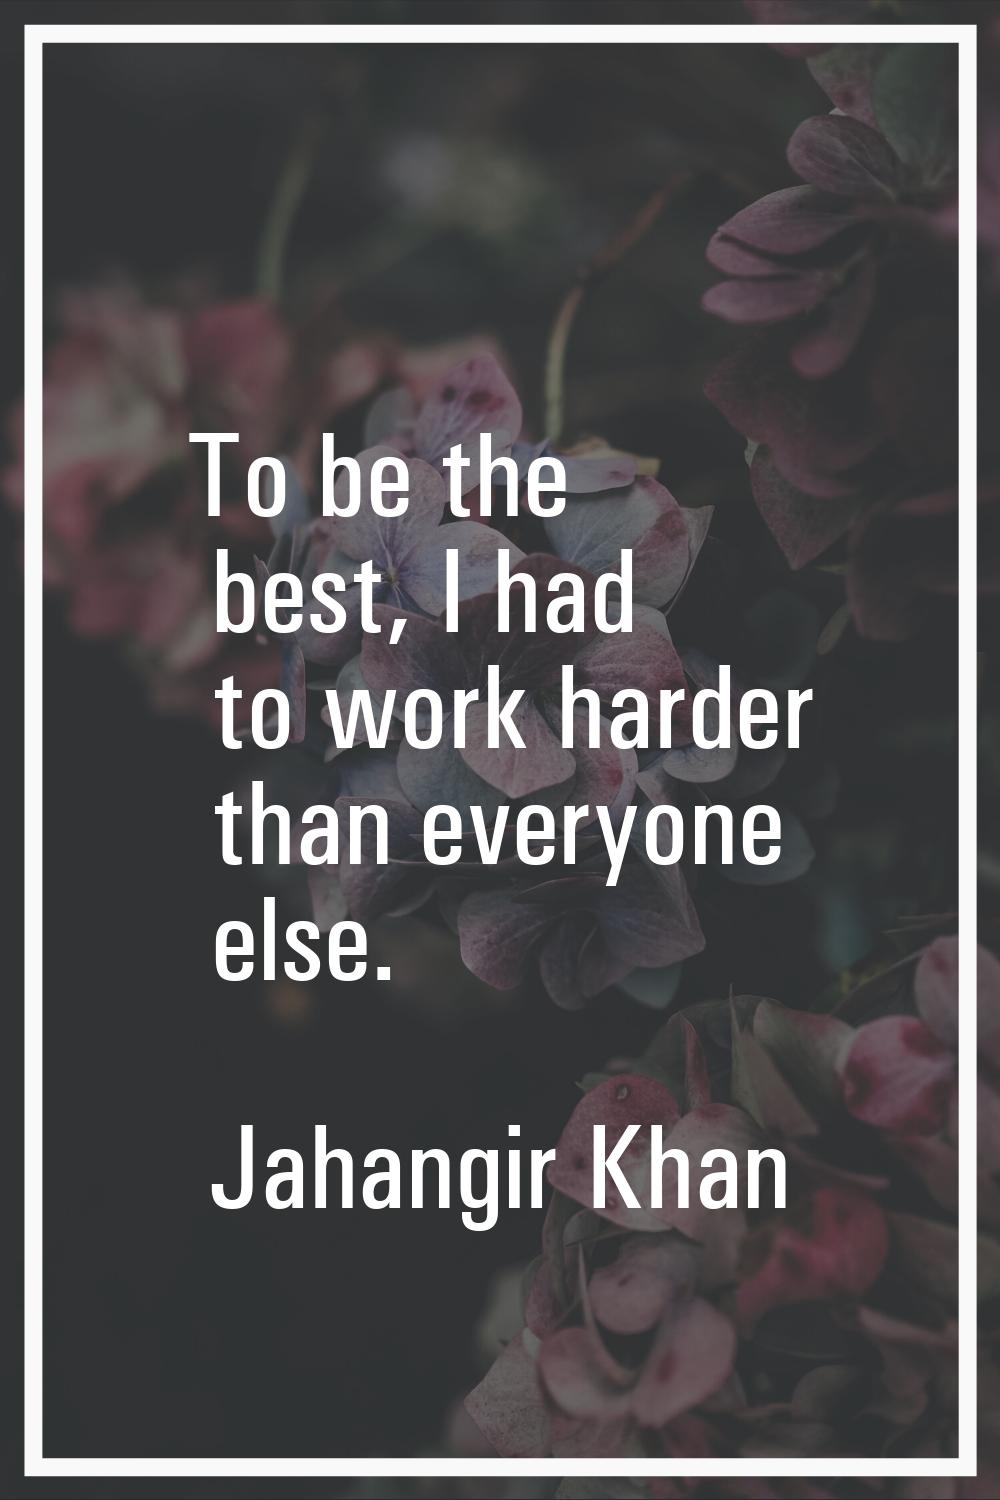 To be the best, I had to work harder than everyone else.